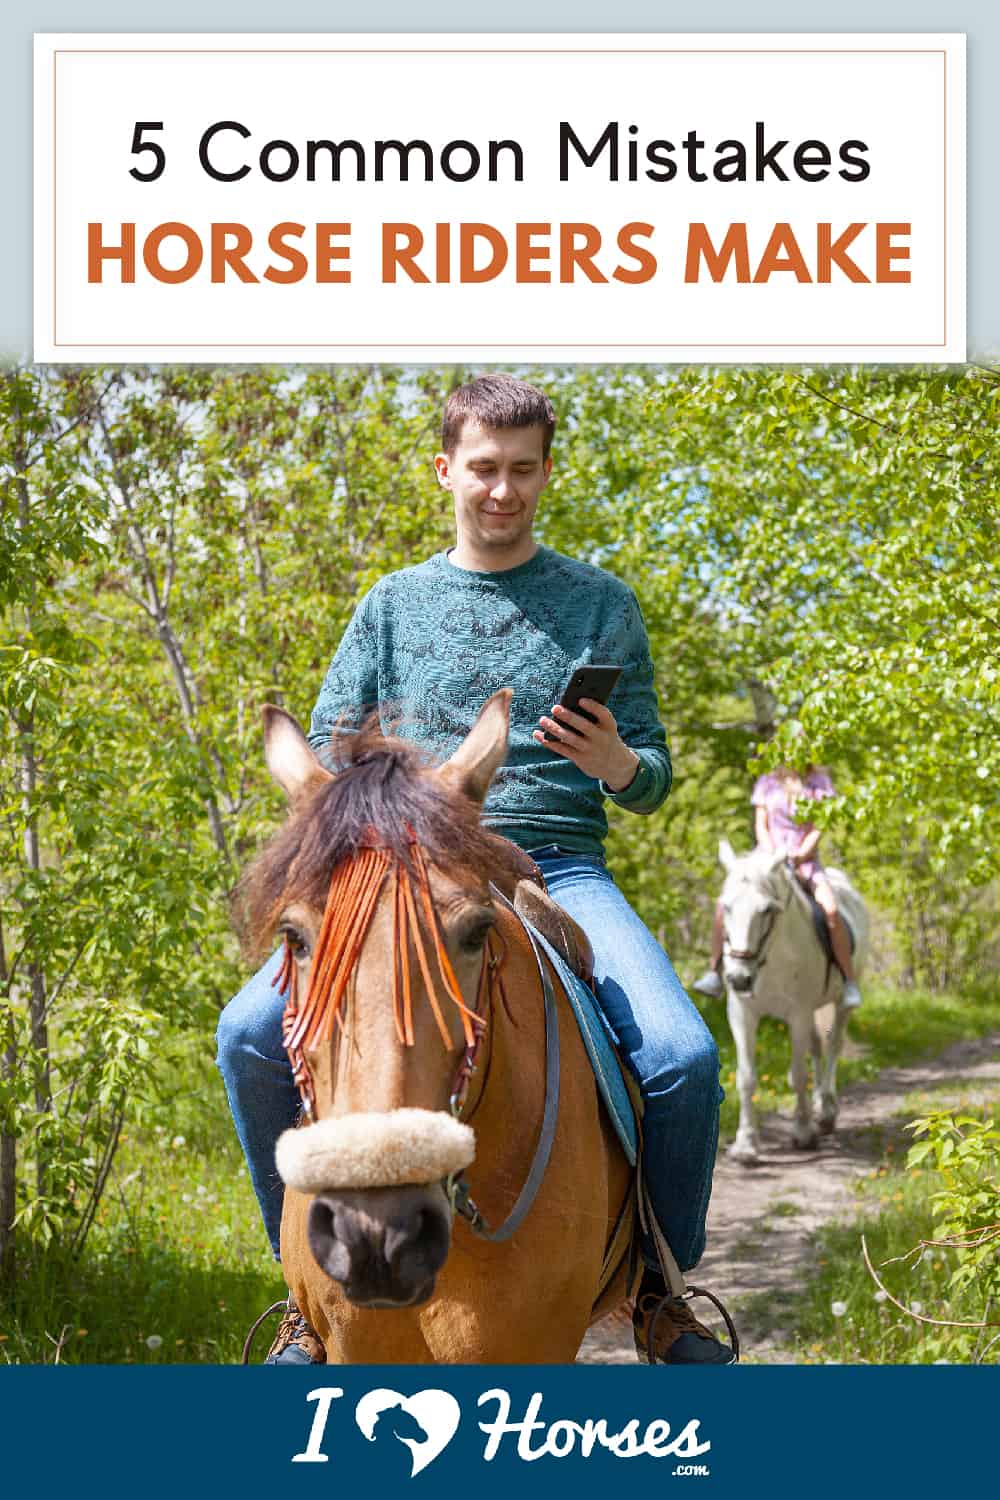 5 Common Mistakes Horse Riders Make-01-01